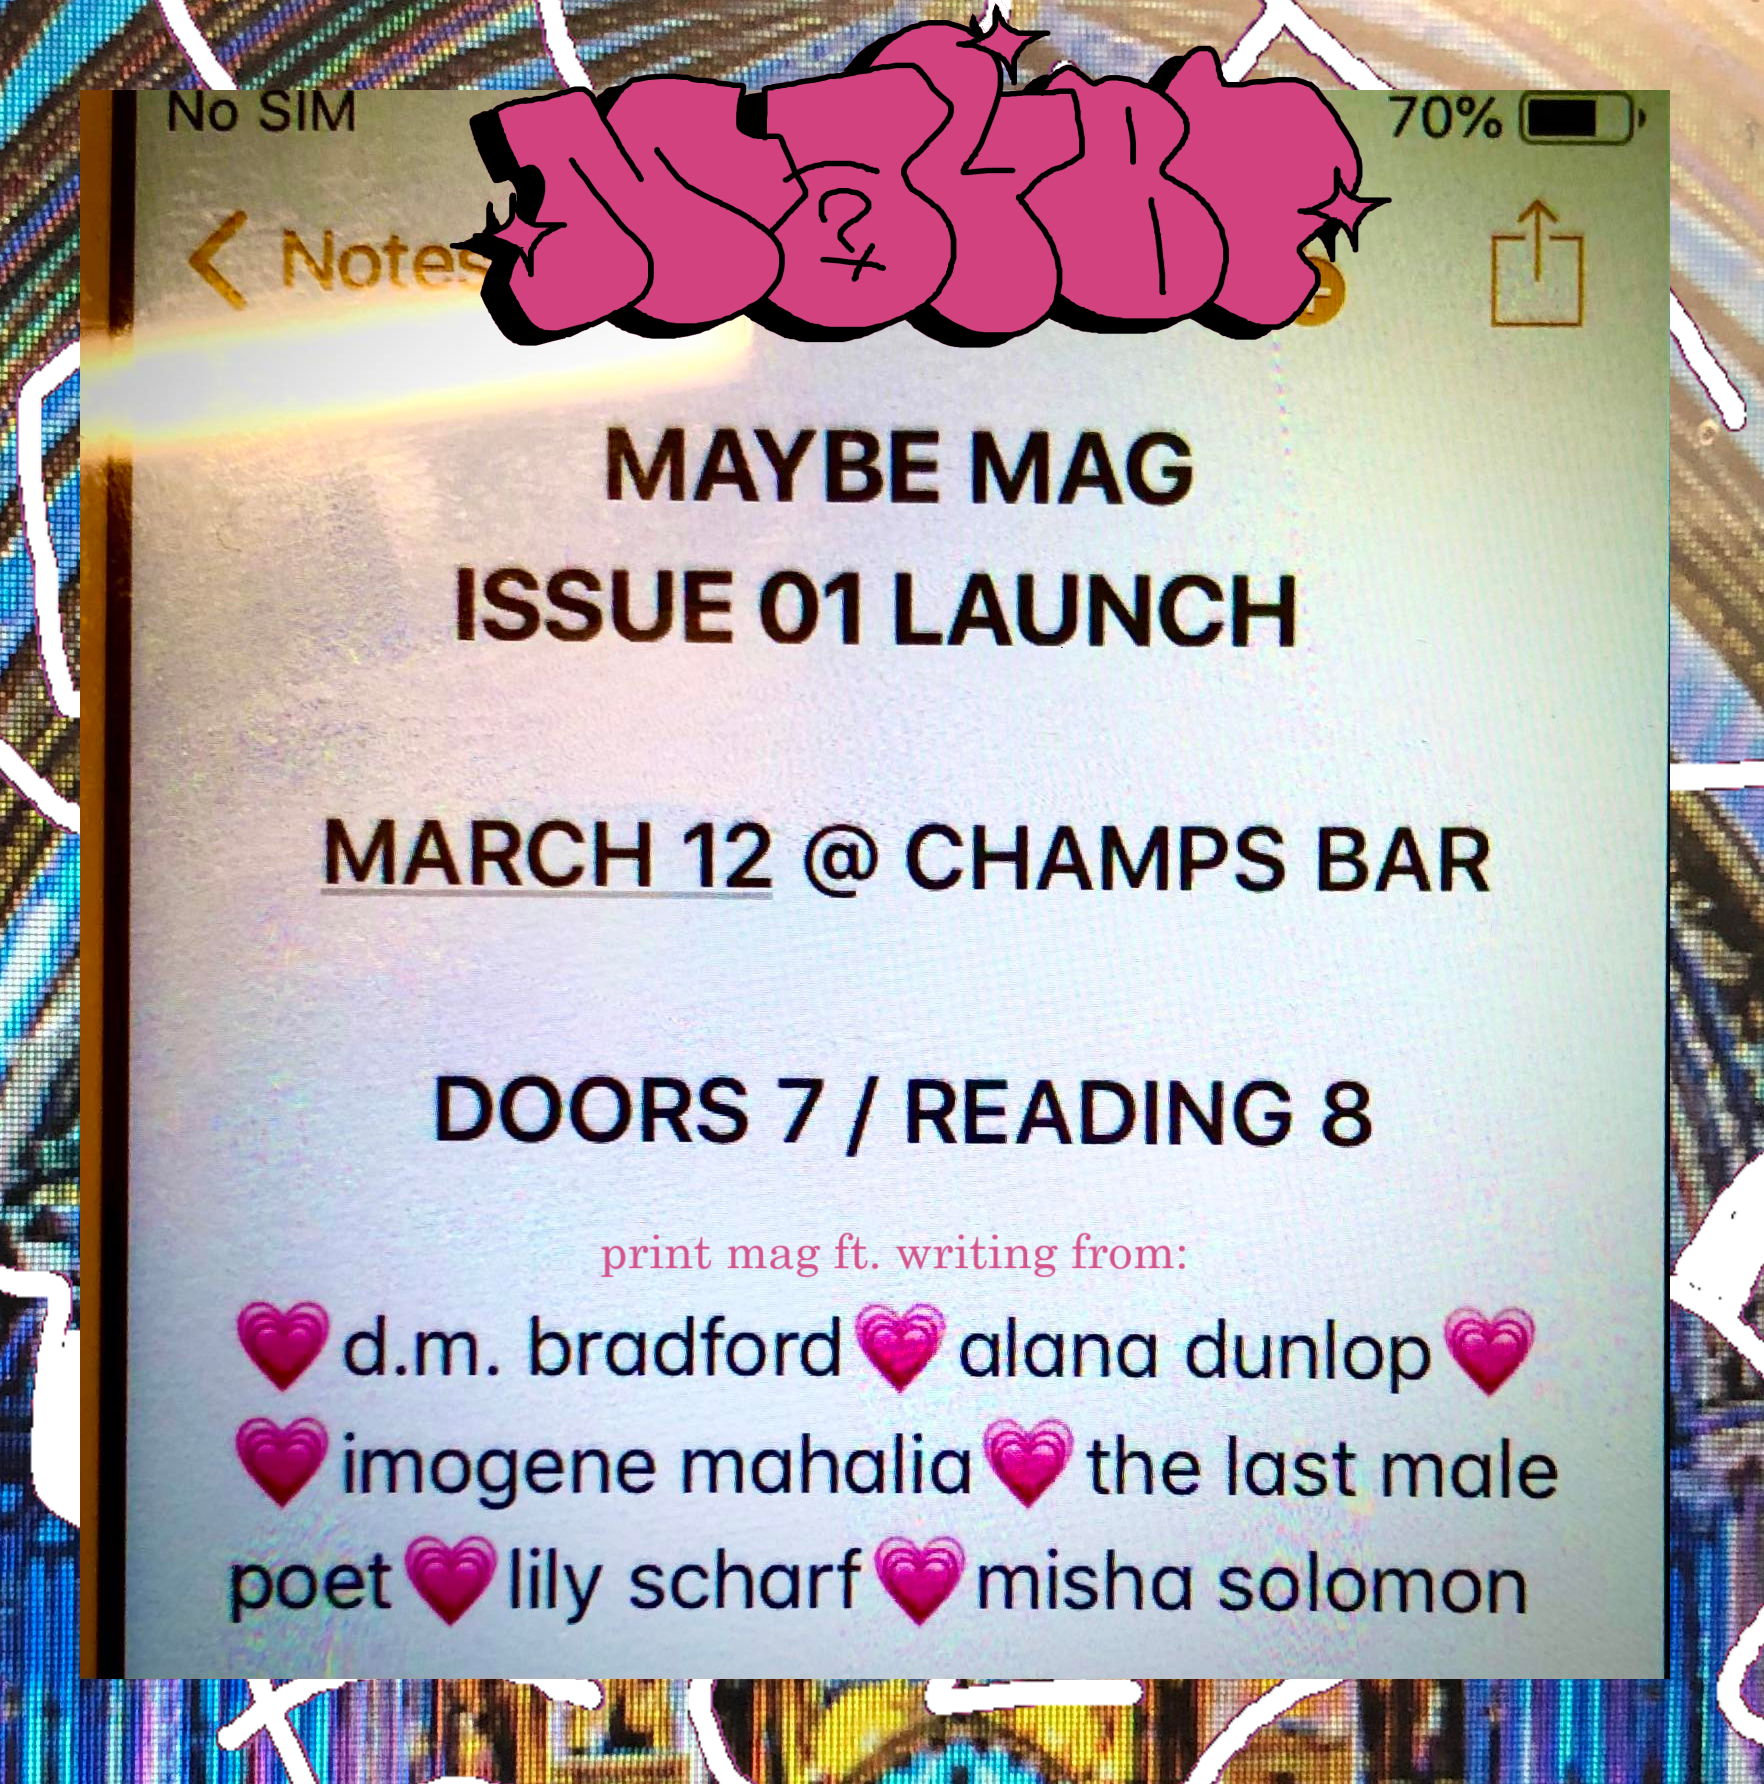 ISSUE 01 LAUNCH